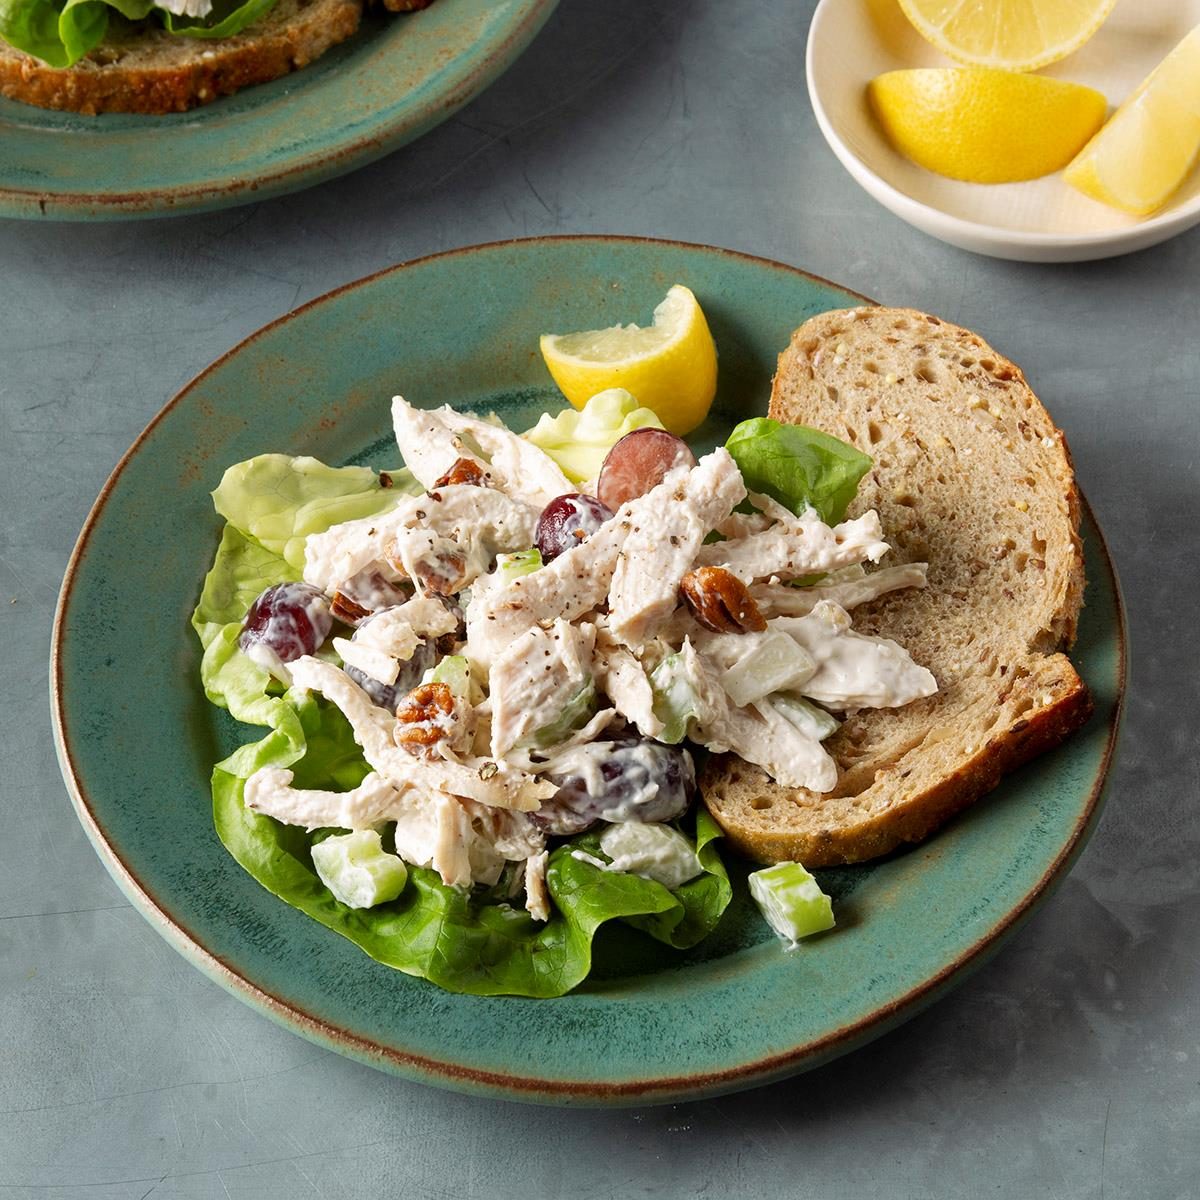 https://www.tasteofhome.com/wp-content/uploads/2018/01/Chunky-Chicken-Salad-with-Grapes-and-Pecans_EXPS_FT19_152167_F_1218_1.jpg